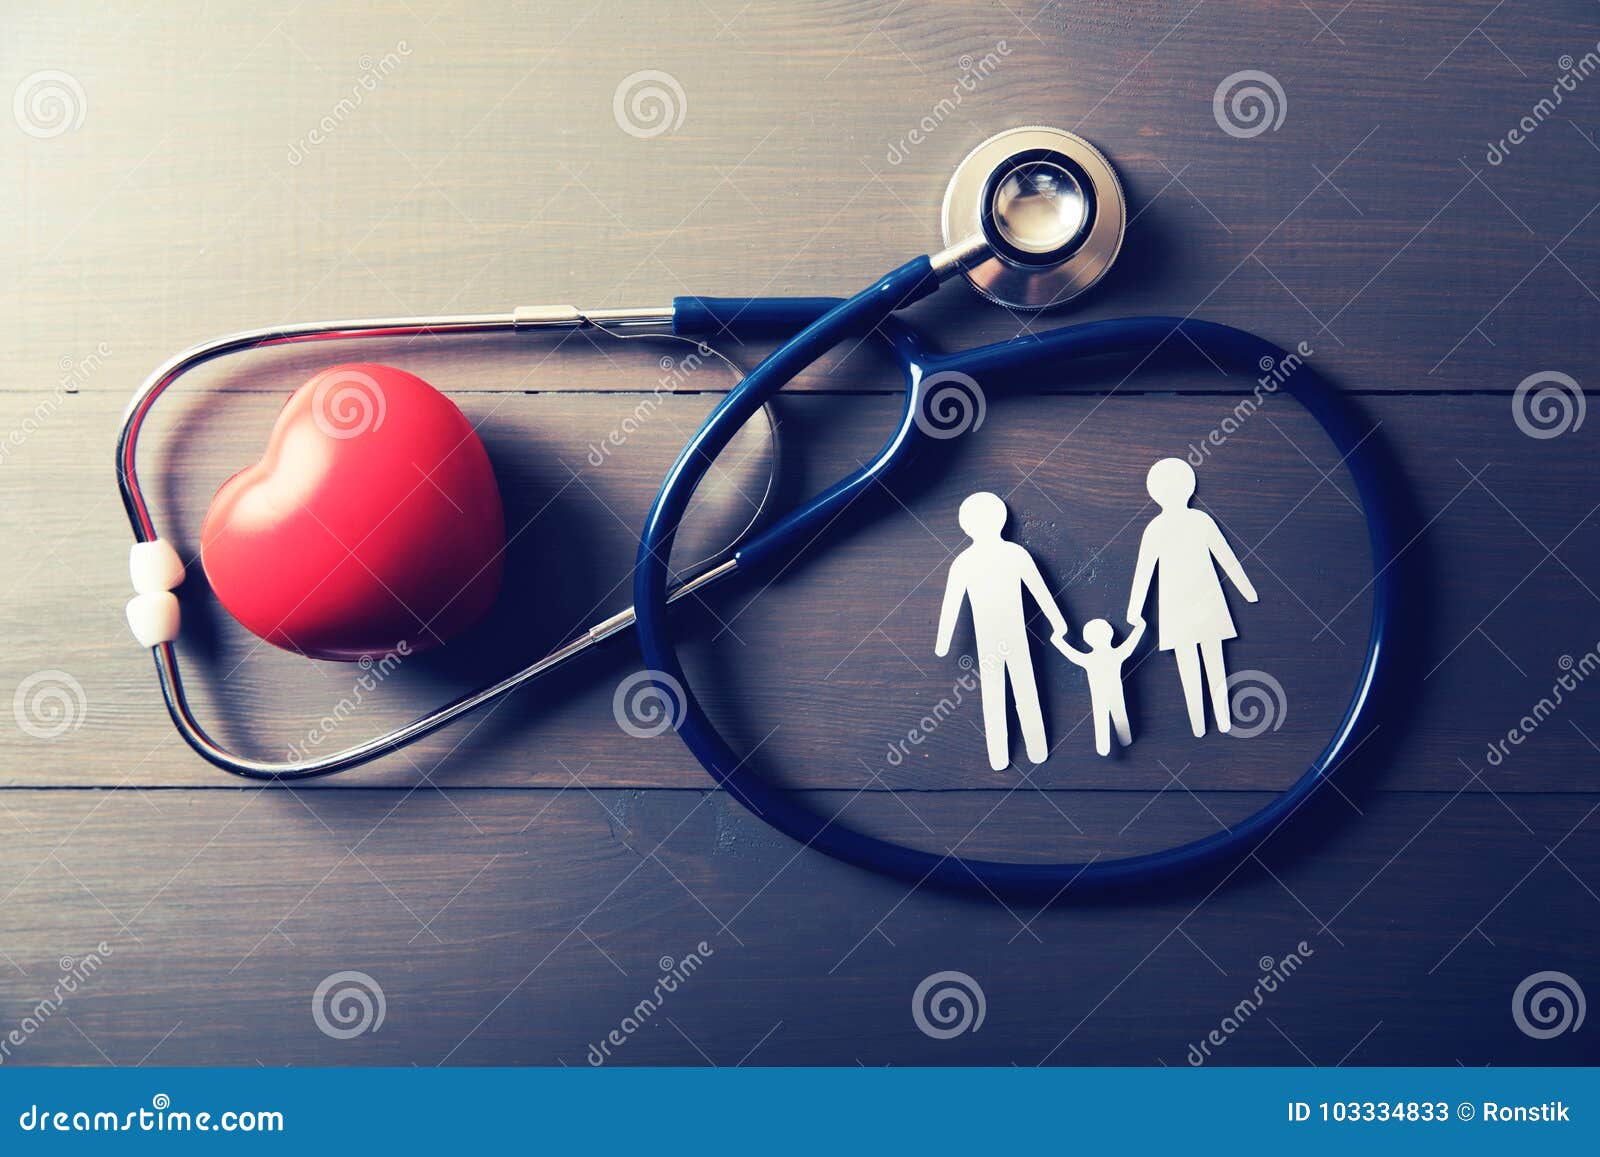 family health care and insurance concept